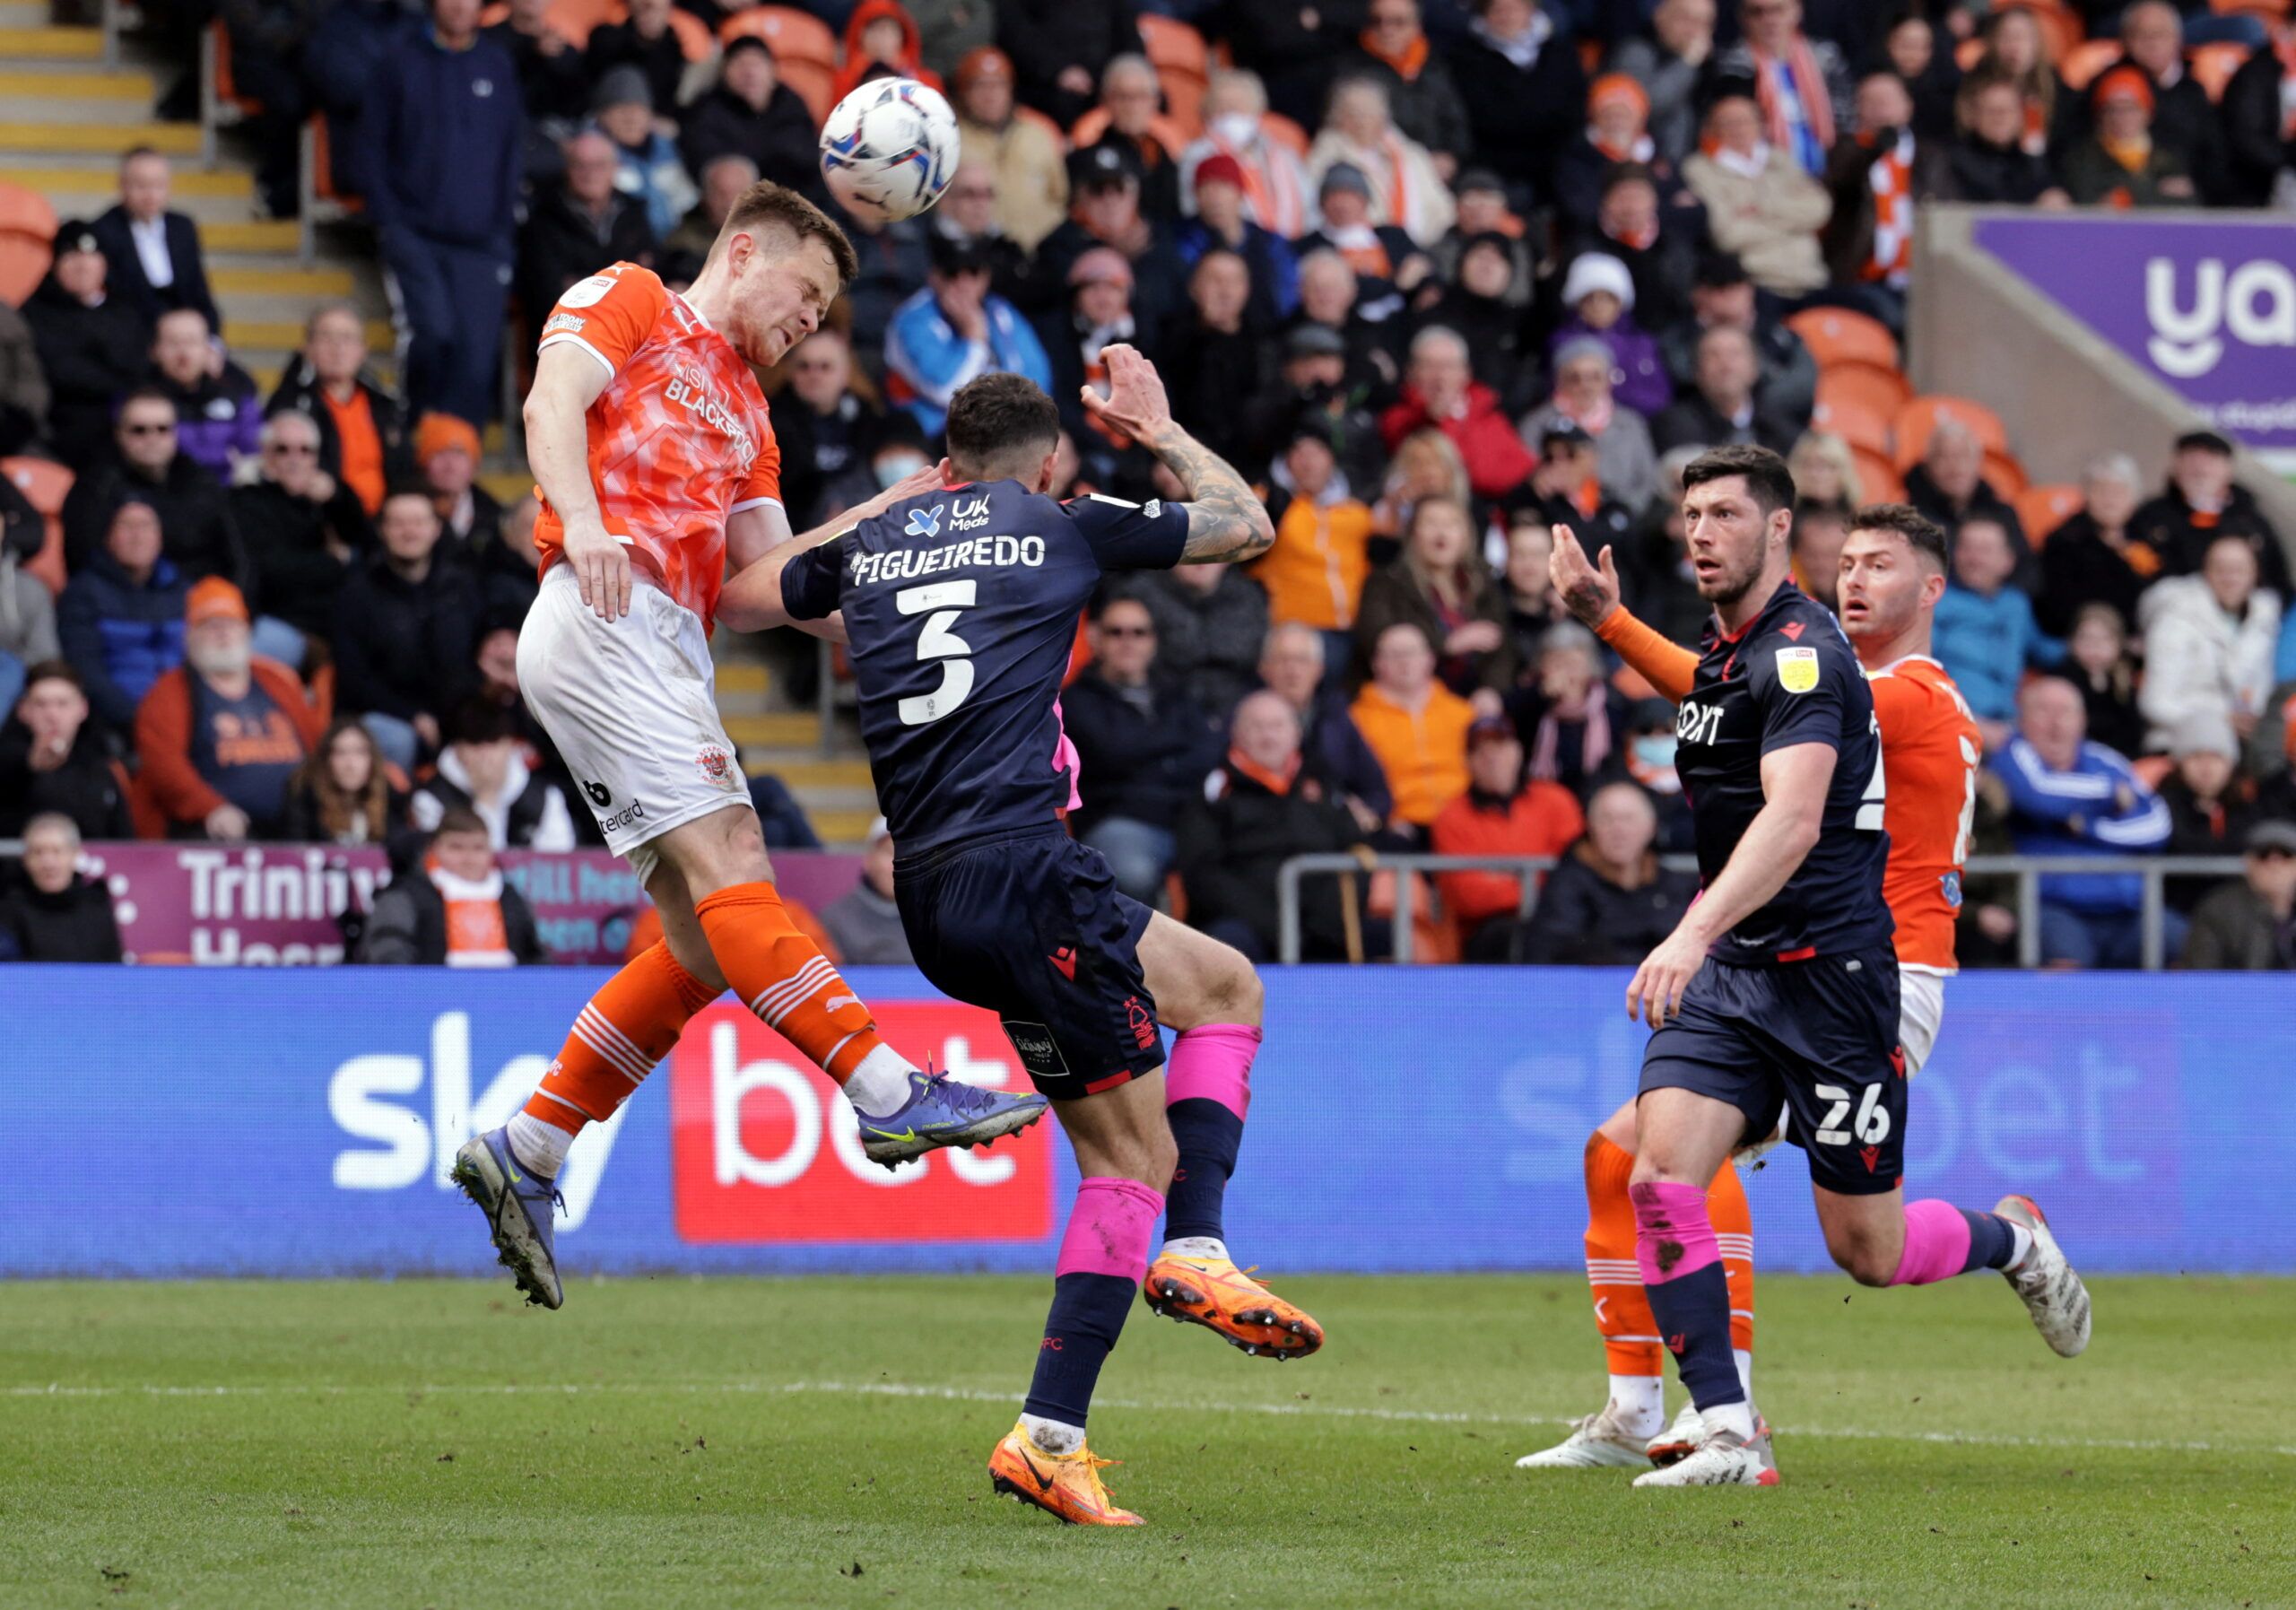 Soccer Football - Championship - Blackpool v Nottingham Forest - Bloomfield Road, Blackpool, Britain - April 2, 2022 Blackpool's Jordan Thorniley in action with Nottingham Forest's Tobias Figueiredo   Action Images/John Clifton  EDITORIAL USE ONLY. No use with unauthorized audio, video, data, fixture lists, club/league logos or 